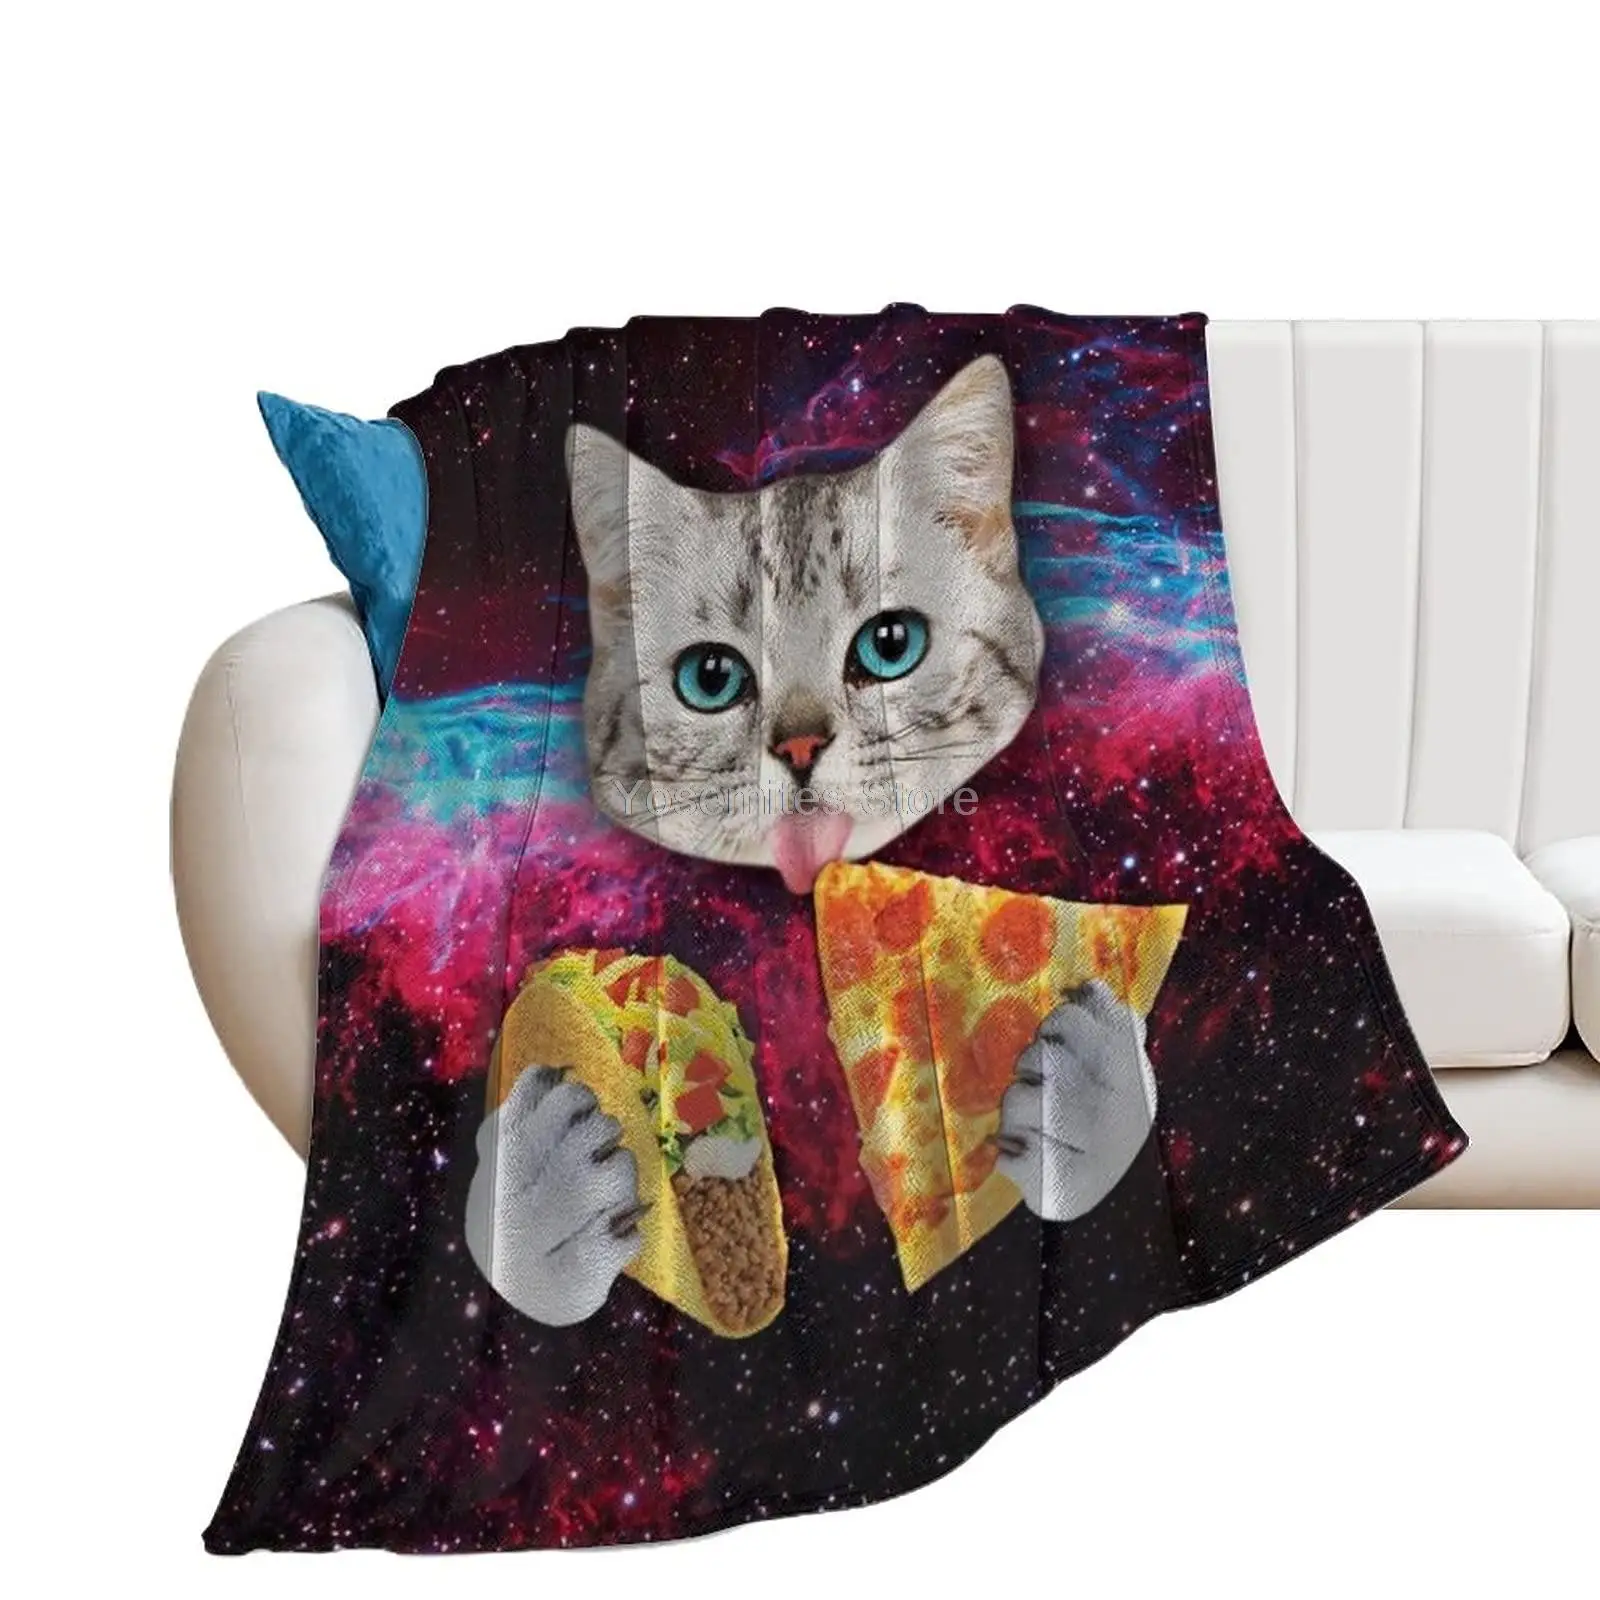 

JunoSports Cat Ultra Soft Fleece Blanket for Kids Adults Galaxy Pizza Cat Lightweight Cozy Plush Flannel Blanket for Sofa/Couch